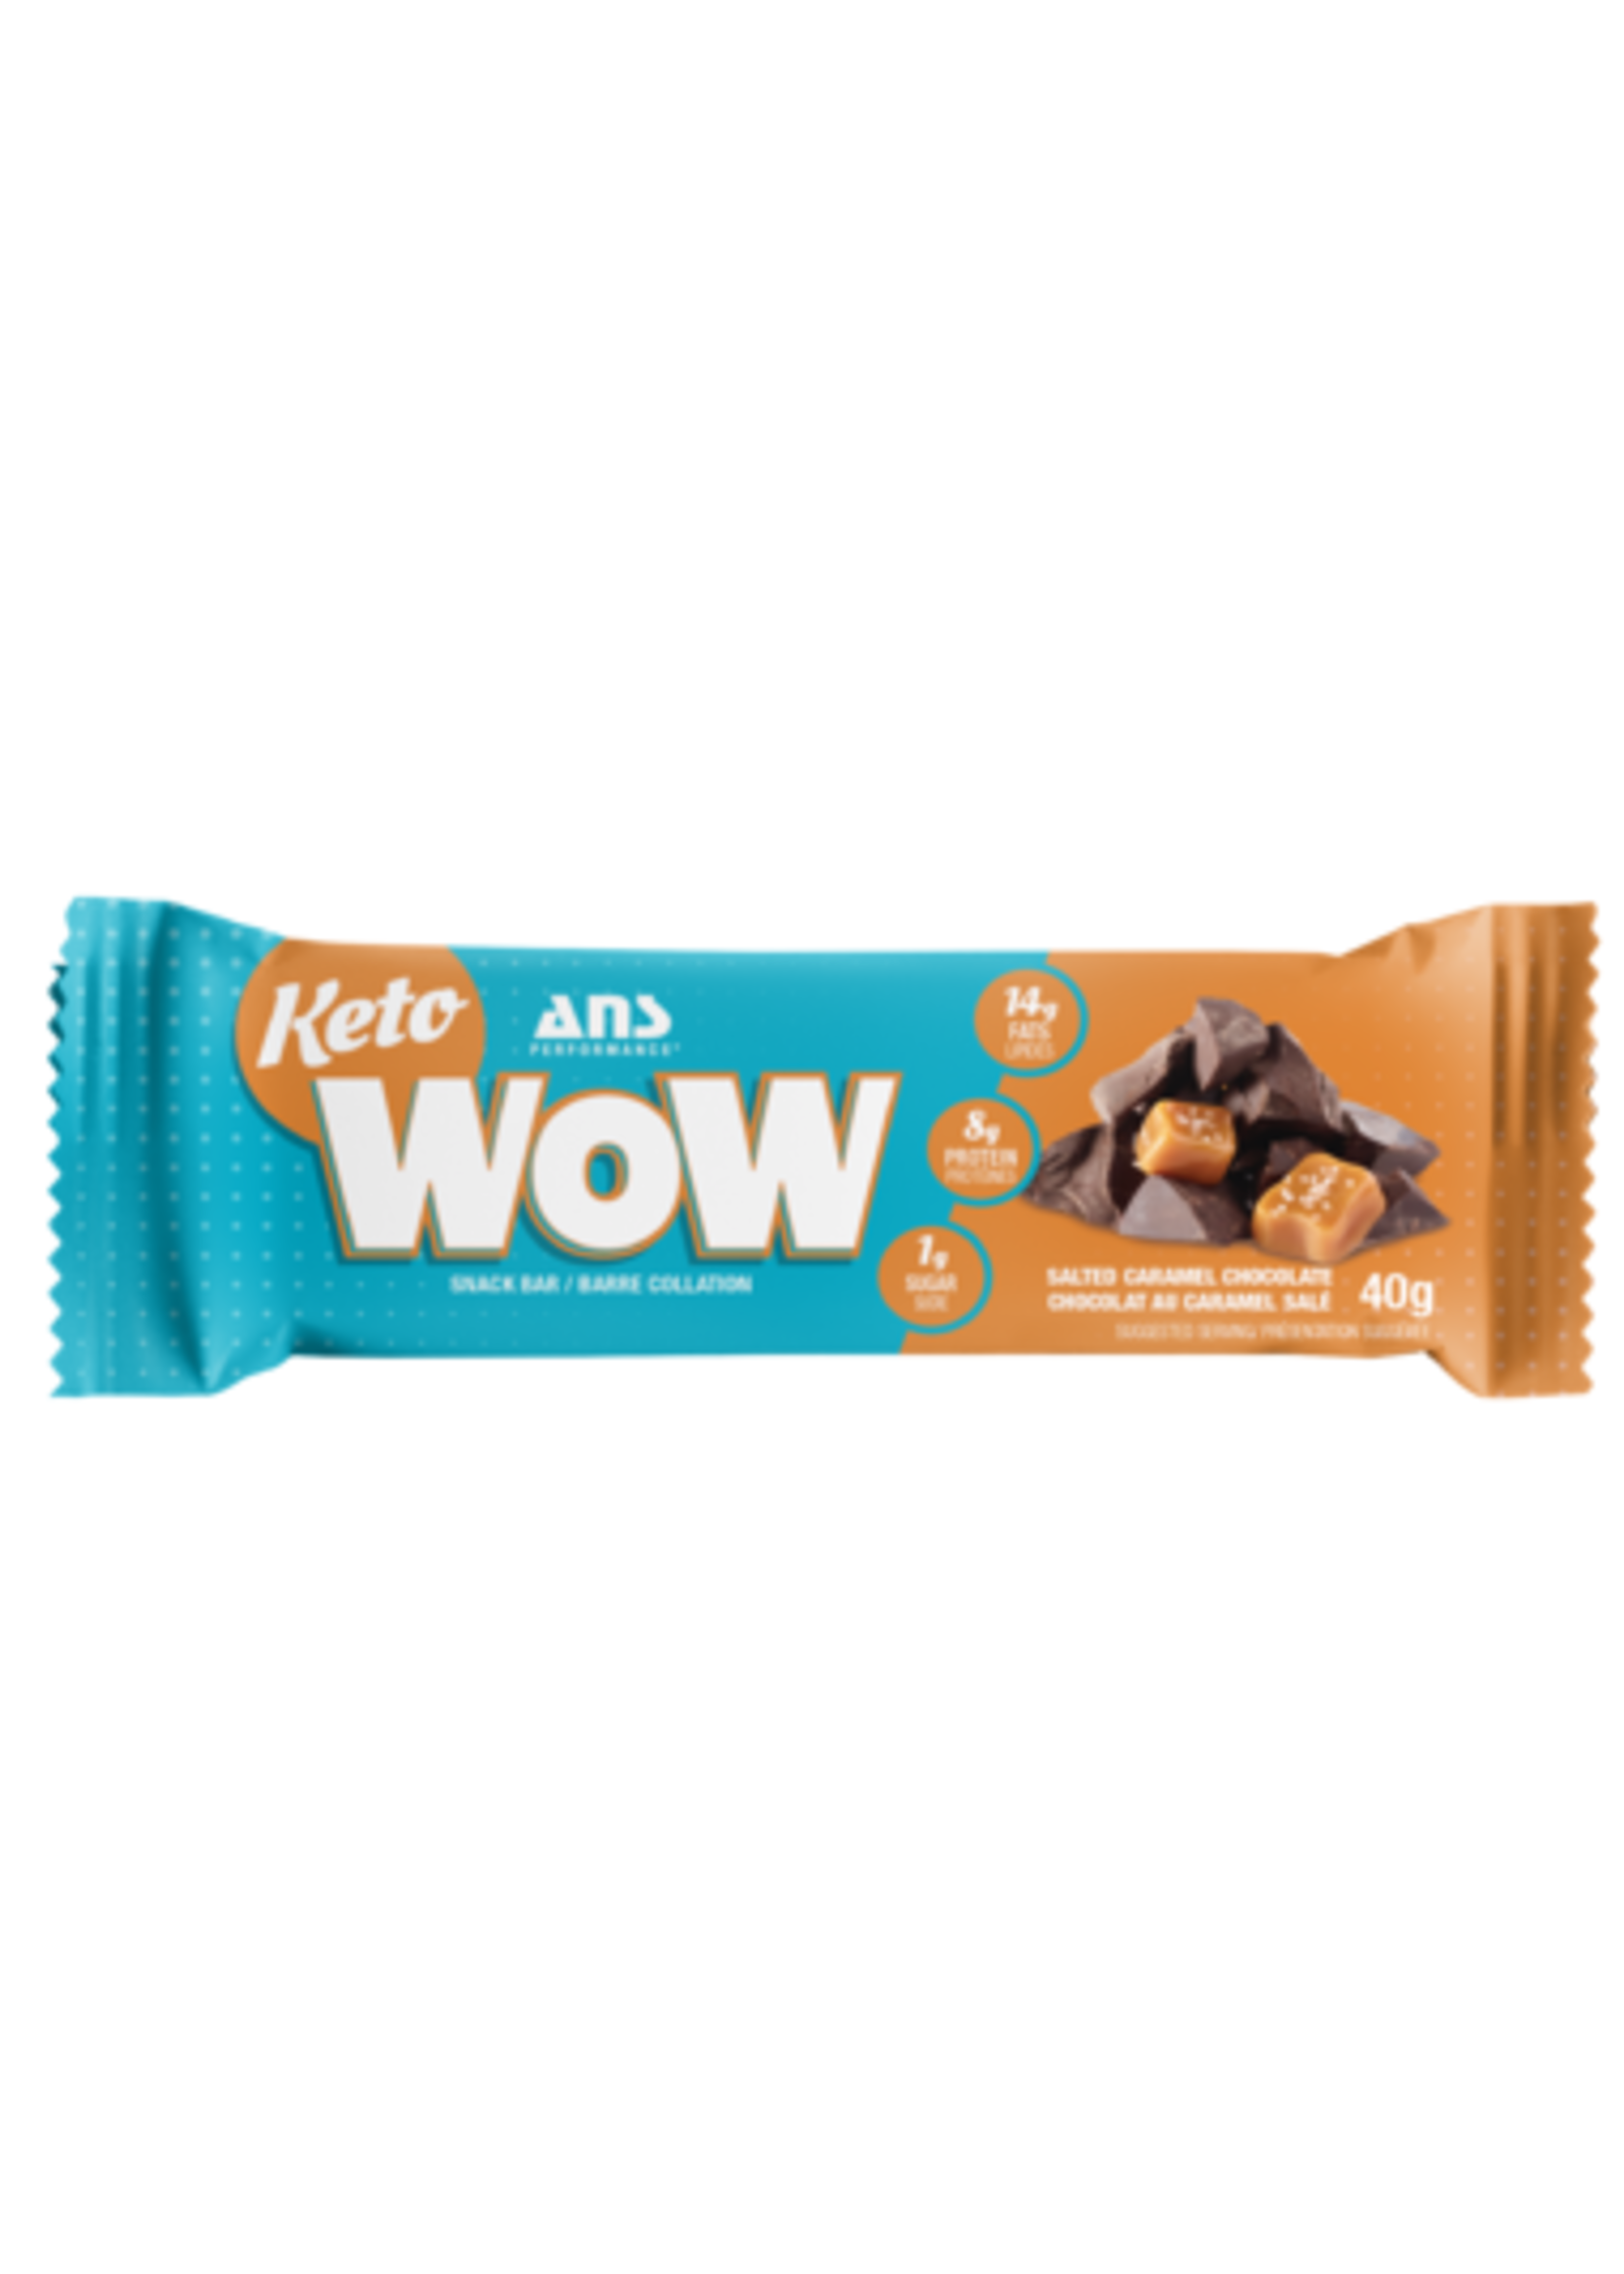 ANS Performance ANS Wow Keto Bars Salted Caramel Chocolate  (Singles)